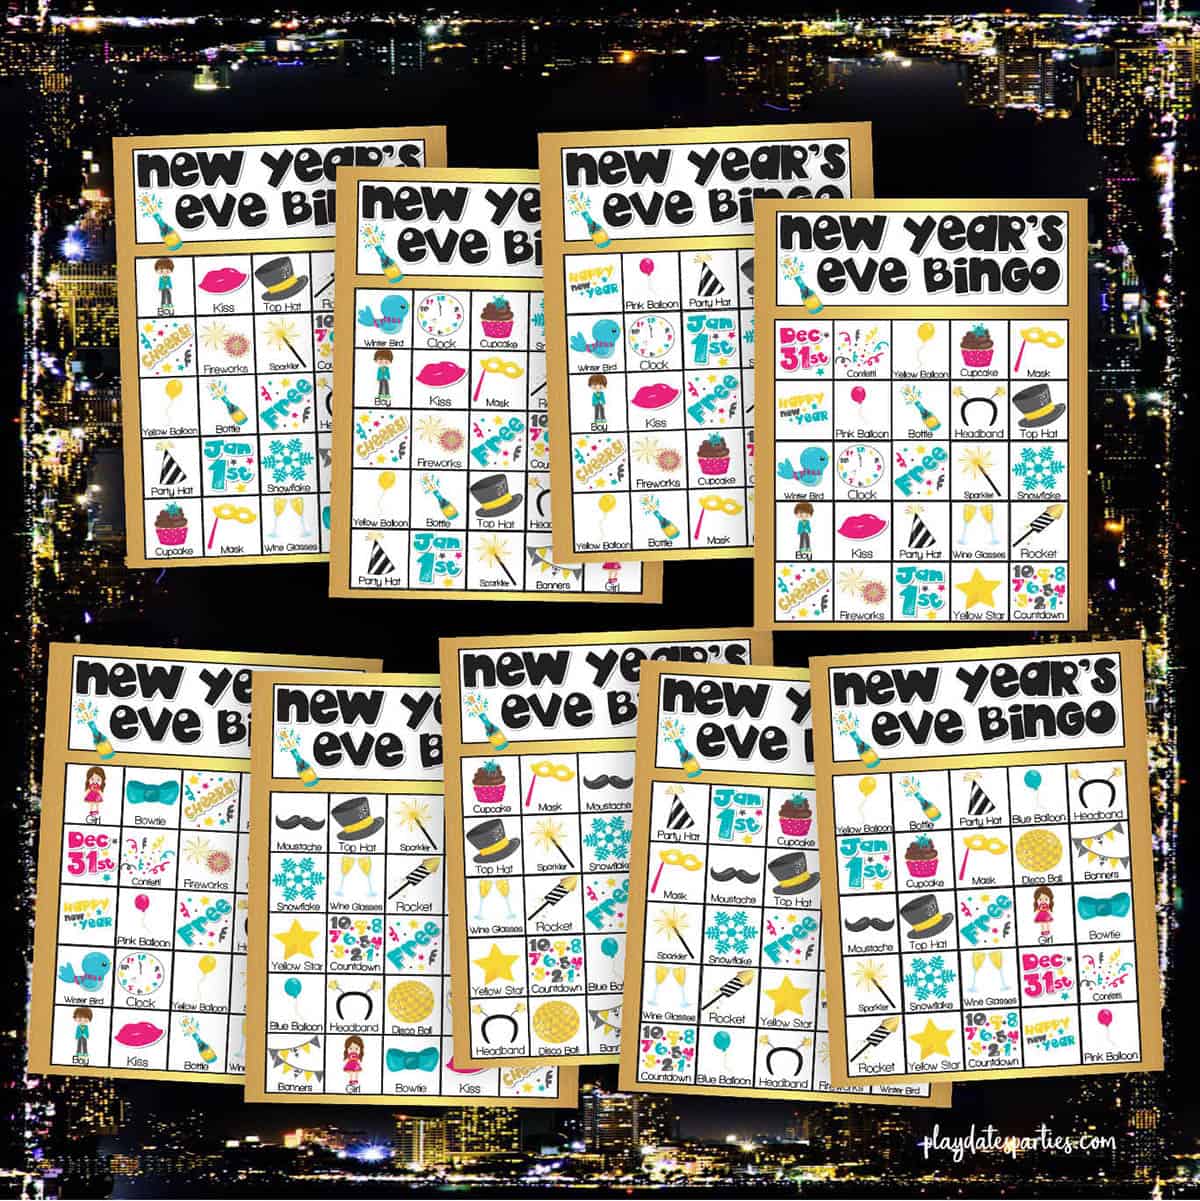 9 bingo cards with a gold border and brightly colored graphics.